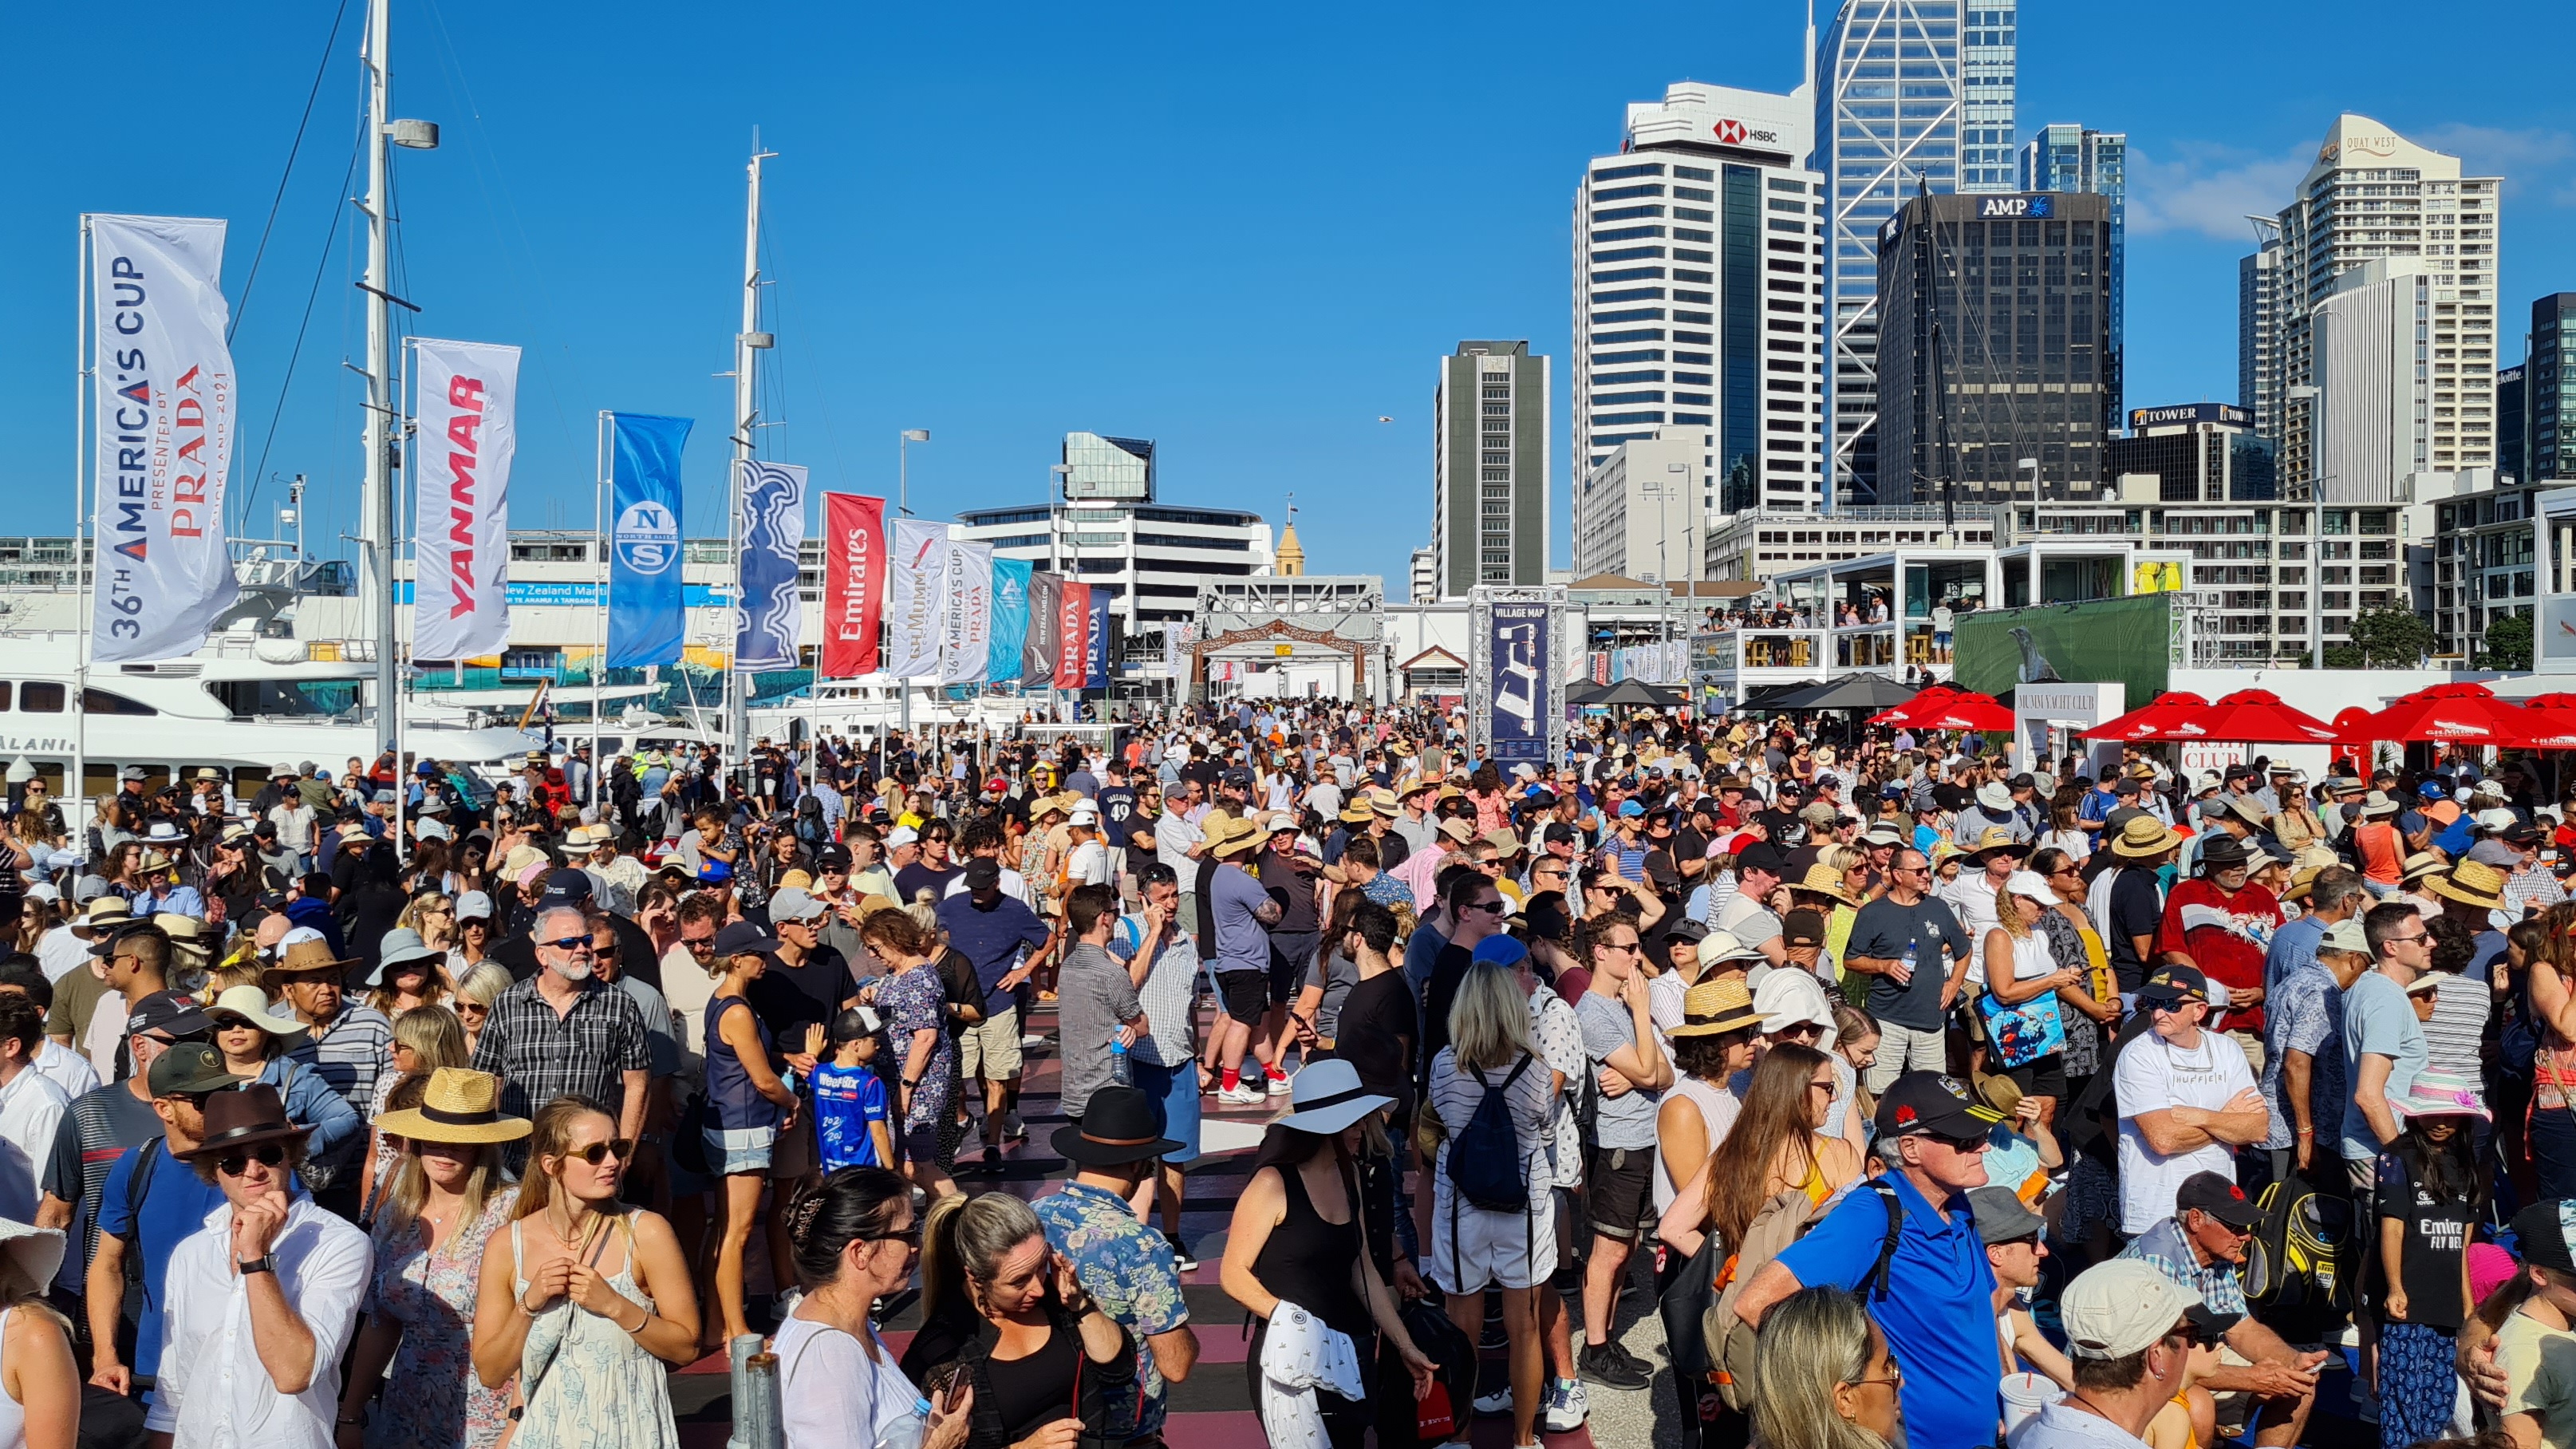 CROWDS GATHER TO WATCH A RACE IN THE 36TH AMERICA’S CUP VILLAGE, MARCH 2021 (PHOTO BY LEONARDO ZAUGG)